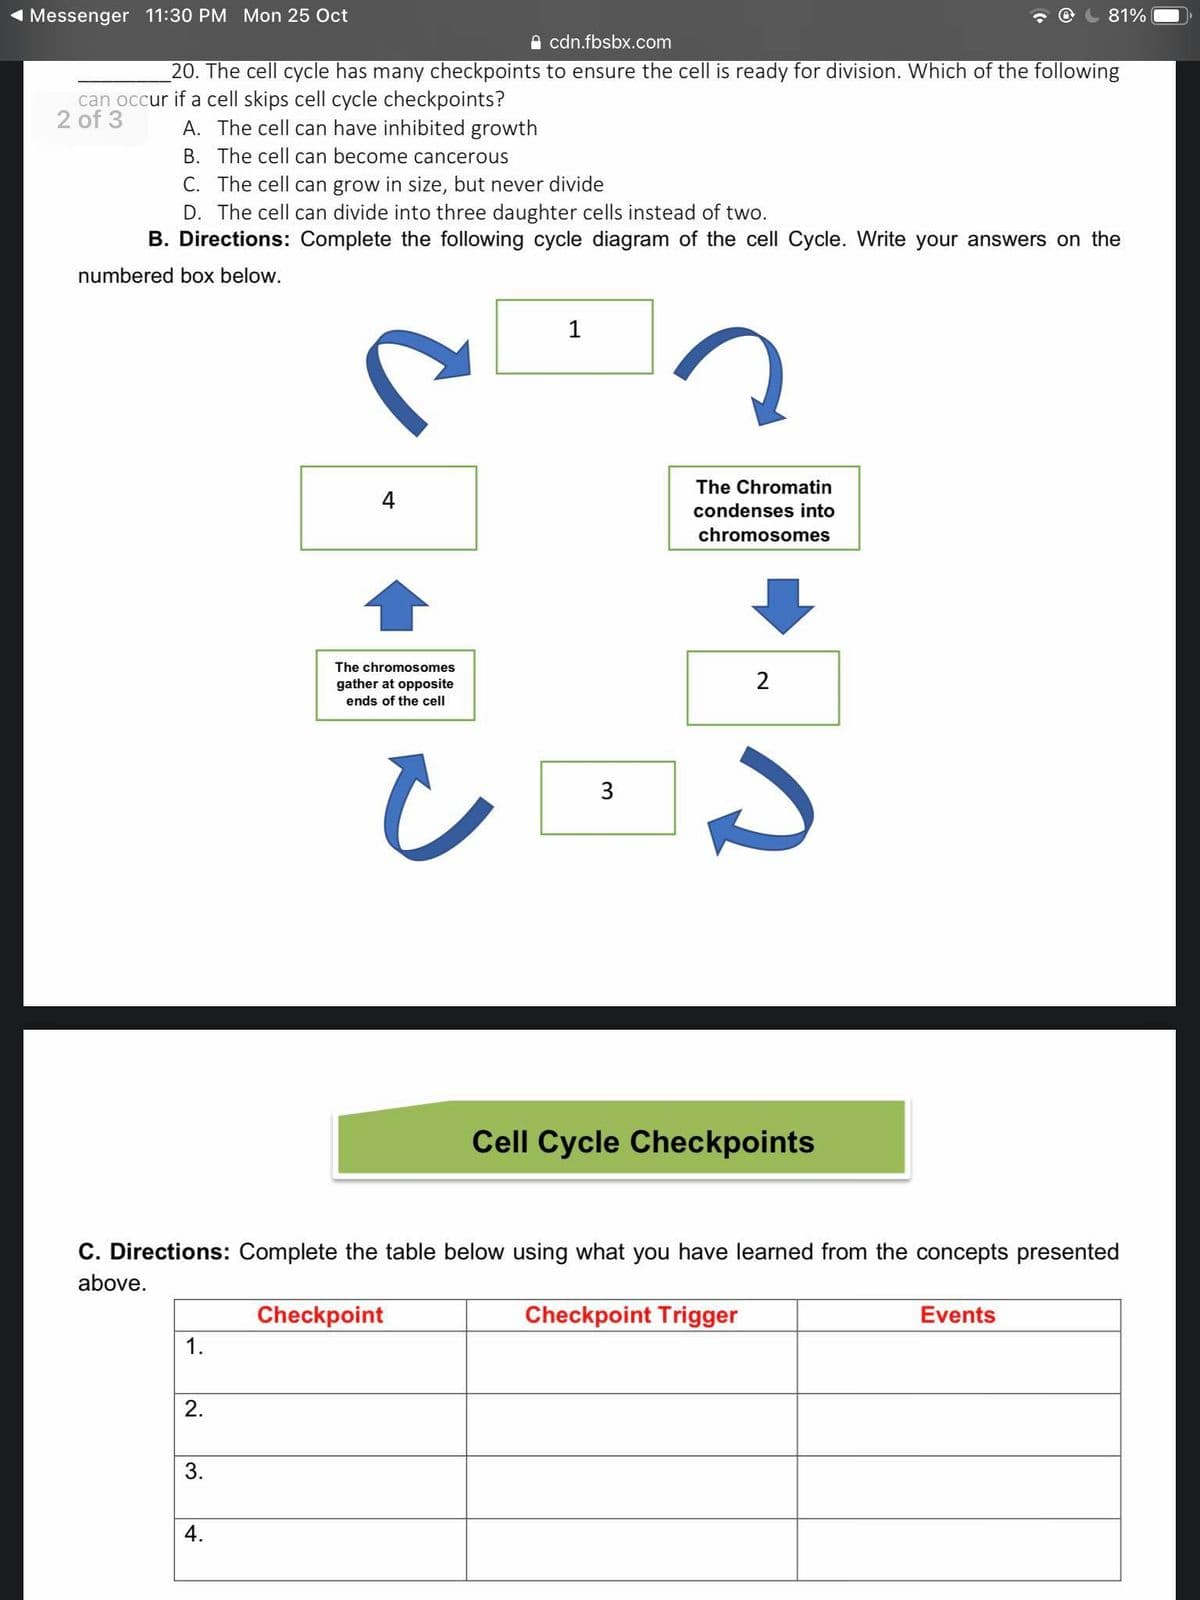 Messenger 11:30 PM Mon 25 Oct
81%
A cdn.fbsbx.com
20. The cell cycle has many checkpoints to ensure the cell is ready for division. Which of the following
can occur if a cell skips cell cycle checkpoints?
2 of 3
A. The cell can have inhibited growth
B. The cell can become cancerous
C. The cell can grow in size, but never divide
D. The cell can divide into three daughter cells instead of two.
B. Directions: Complete the following cycle diagram of the cell Cycle. Write your answers on the
numbered box below.
1
The Chromatin
4
condenses into
chromosomes
The chromosomes
gather at opposite
2
ends of the cell
3
Cell Cycle Checkpoints
C. Directions: Complete the table below using what you have learned from the concepts presented
above.
Checkpoint
Checkpoint Trigger
Events
1.
2.
3.
4.
